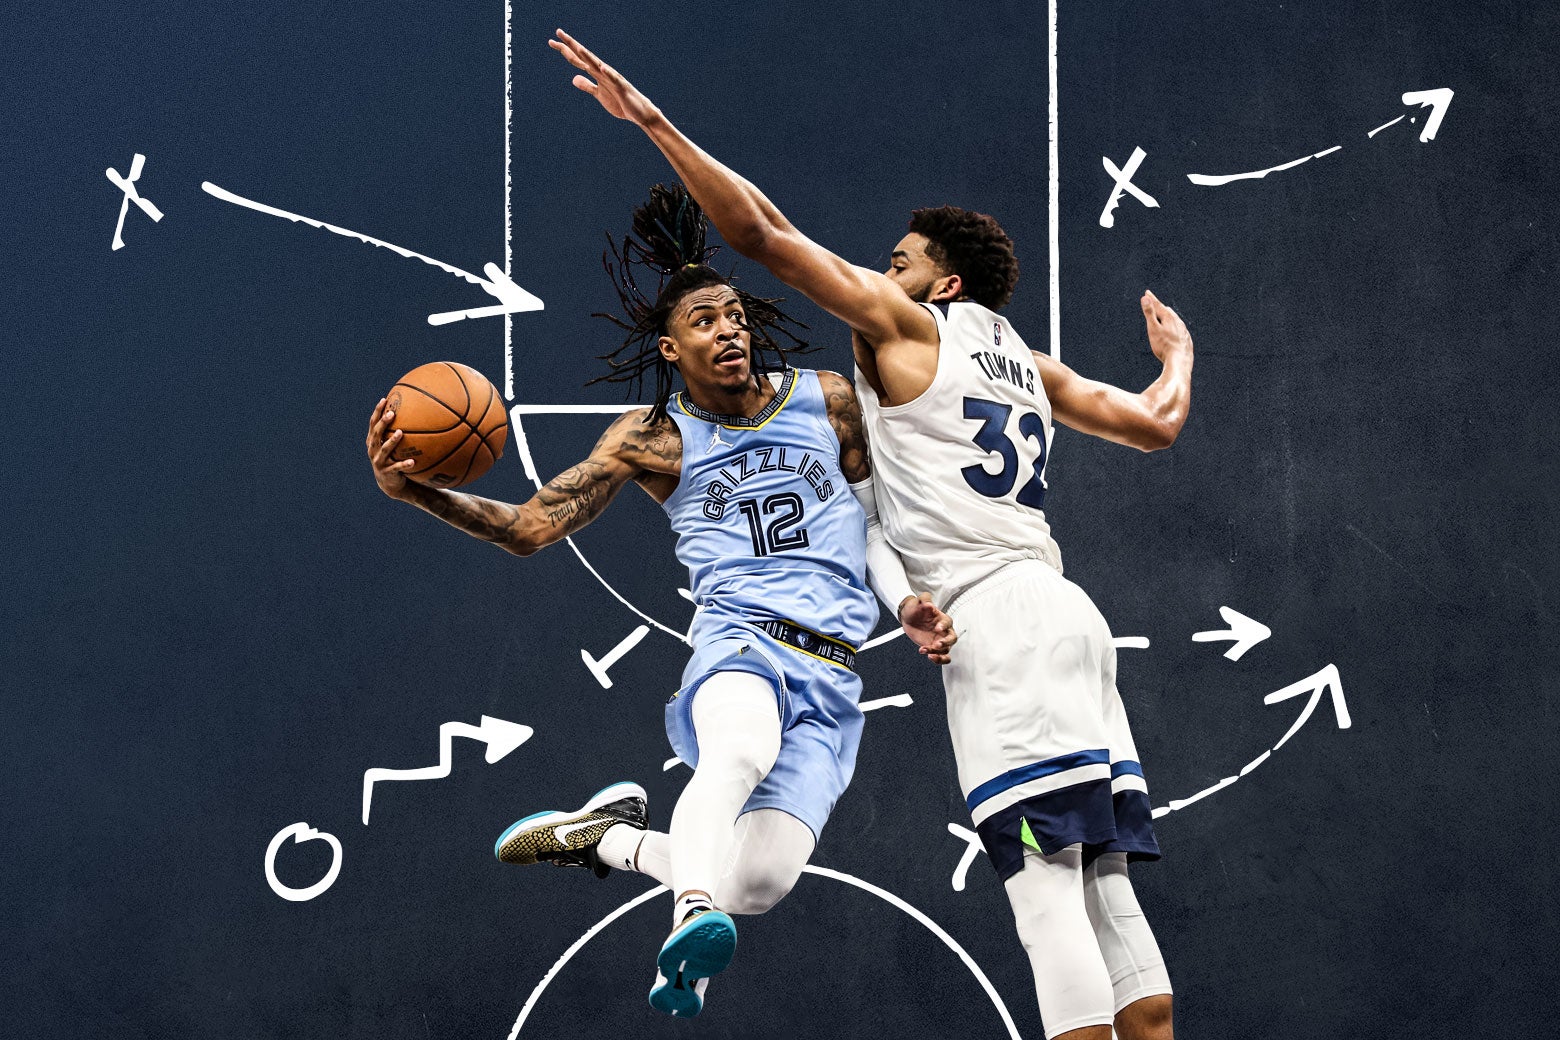 Ja Morant goes for a layup as Karl-Anthony Towns defends him with a hand up, an NBA key and an Xes and Os play illustrated behind them.